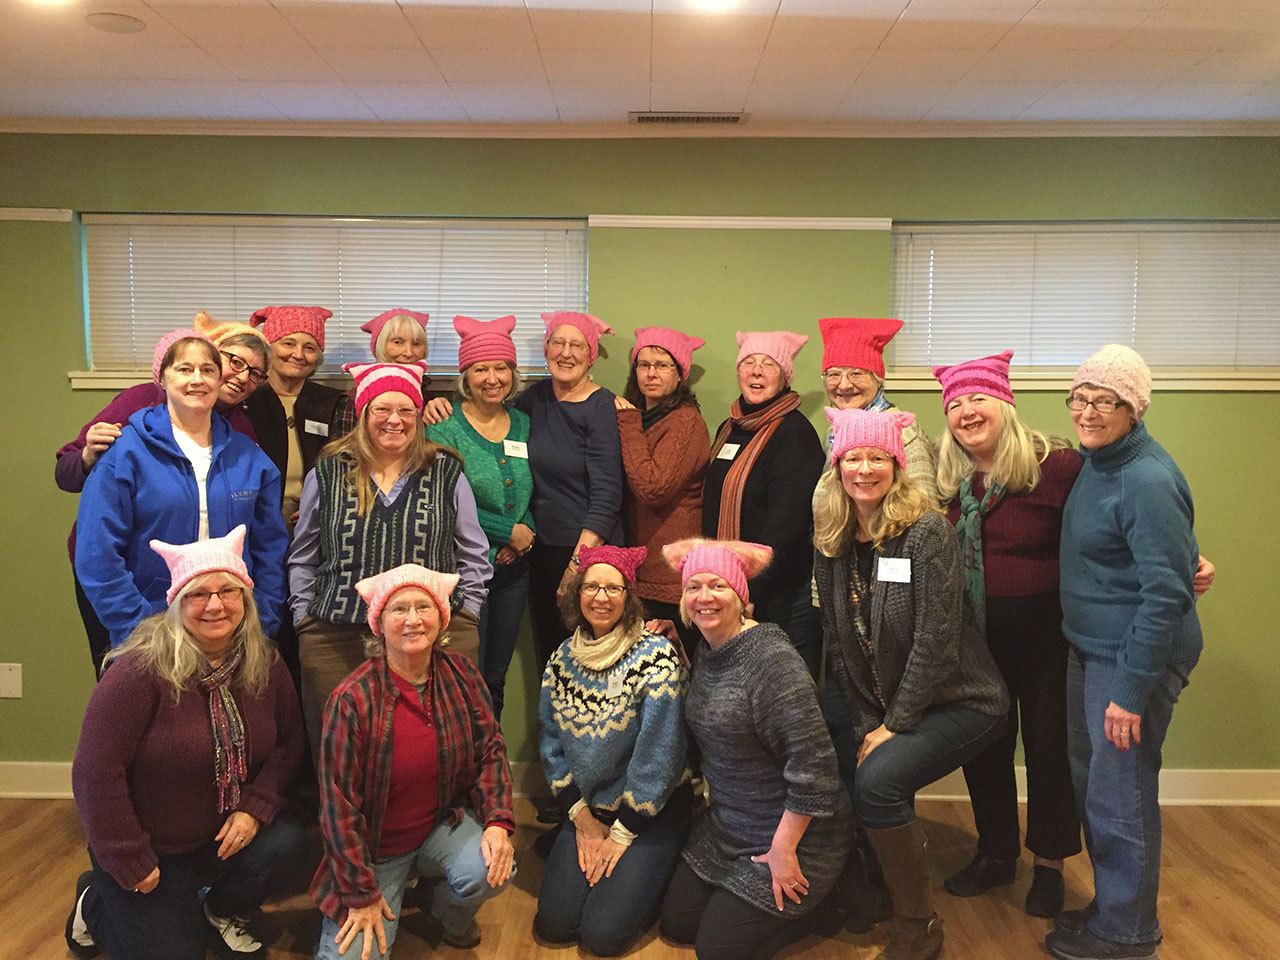 Thirteen members of Vashon’s Second Saturday Knitters club made pussyhats — hats made from pink yarn that will be worn by those marching in The Women’s March on Washington, Saturday and those supporting it from afar. The group is sending the hats to a collection site in Virginia and also making some for interested islanders. (Katie Bunnell Photo)